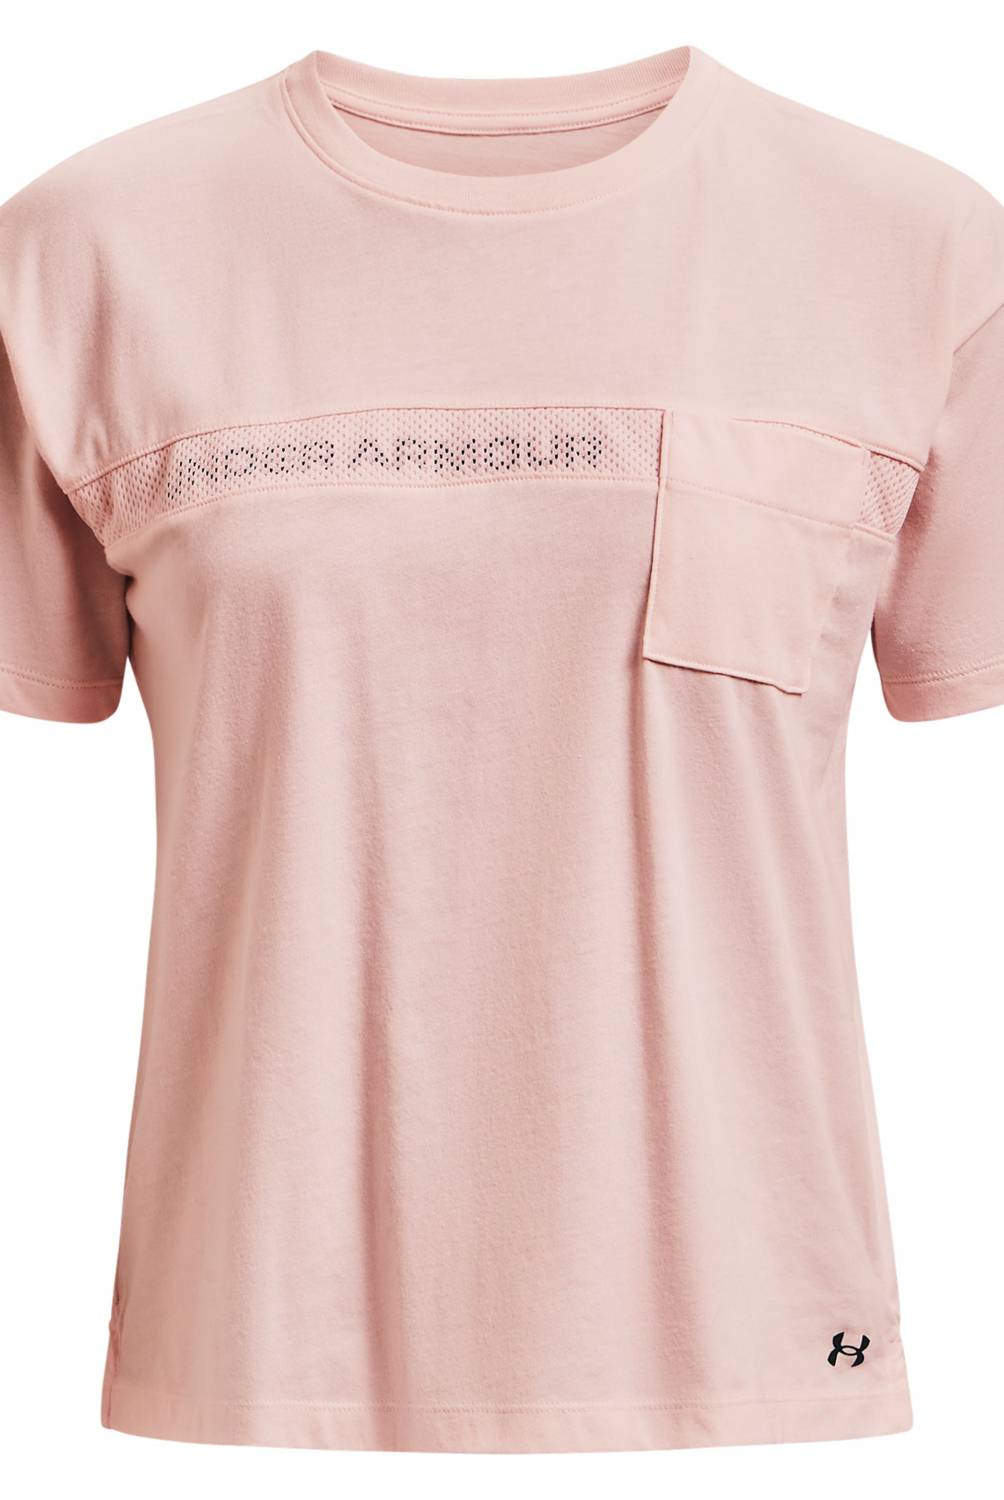 UNDER ARMOUR - Sports t-shirts mujer